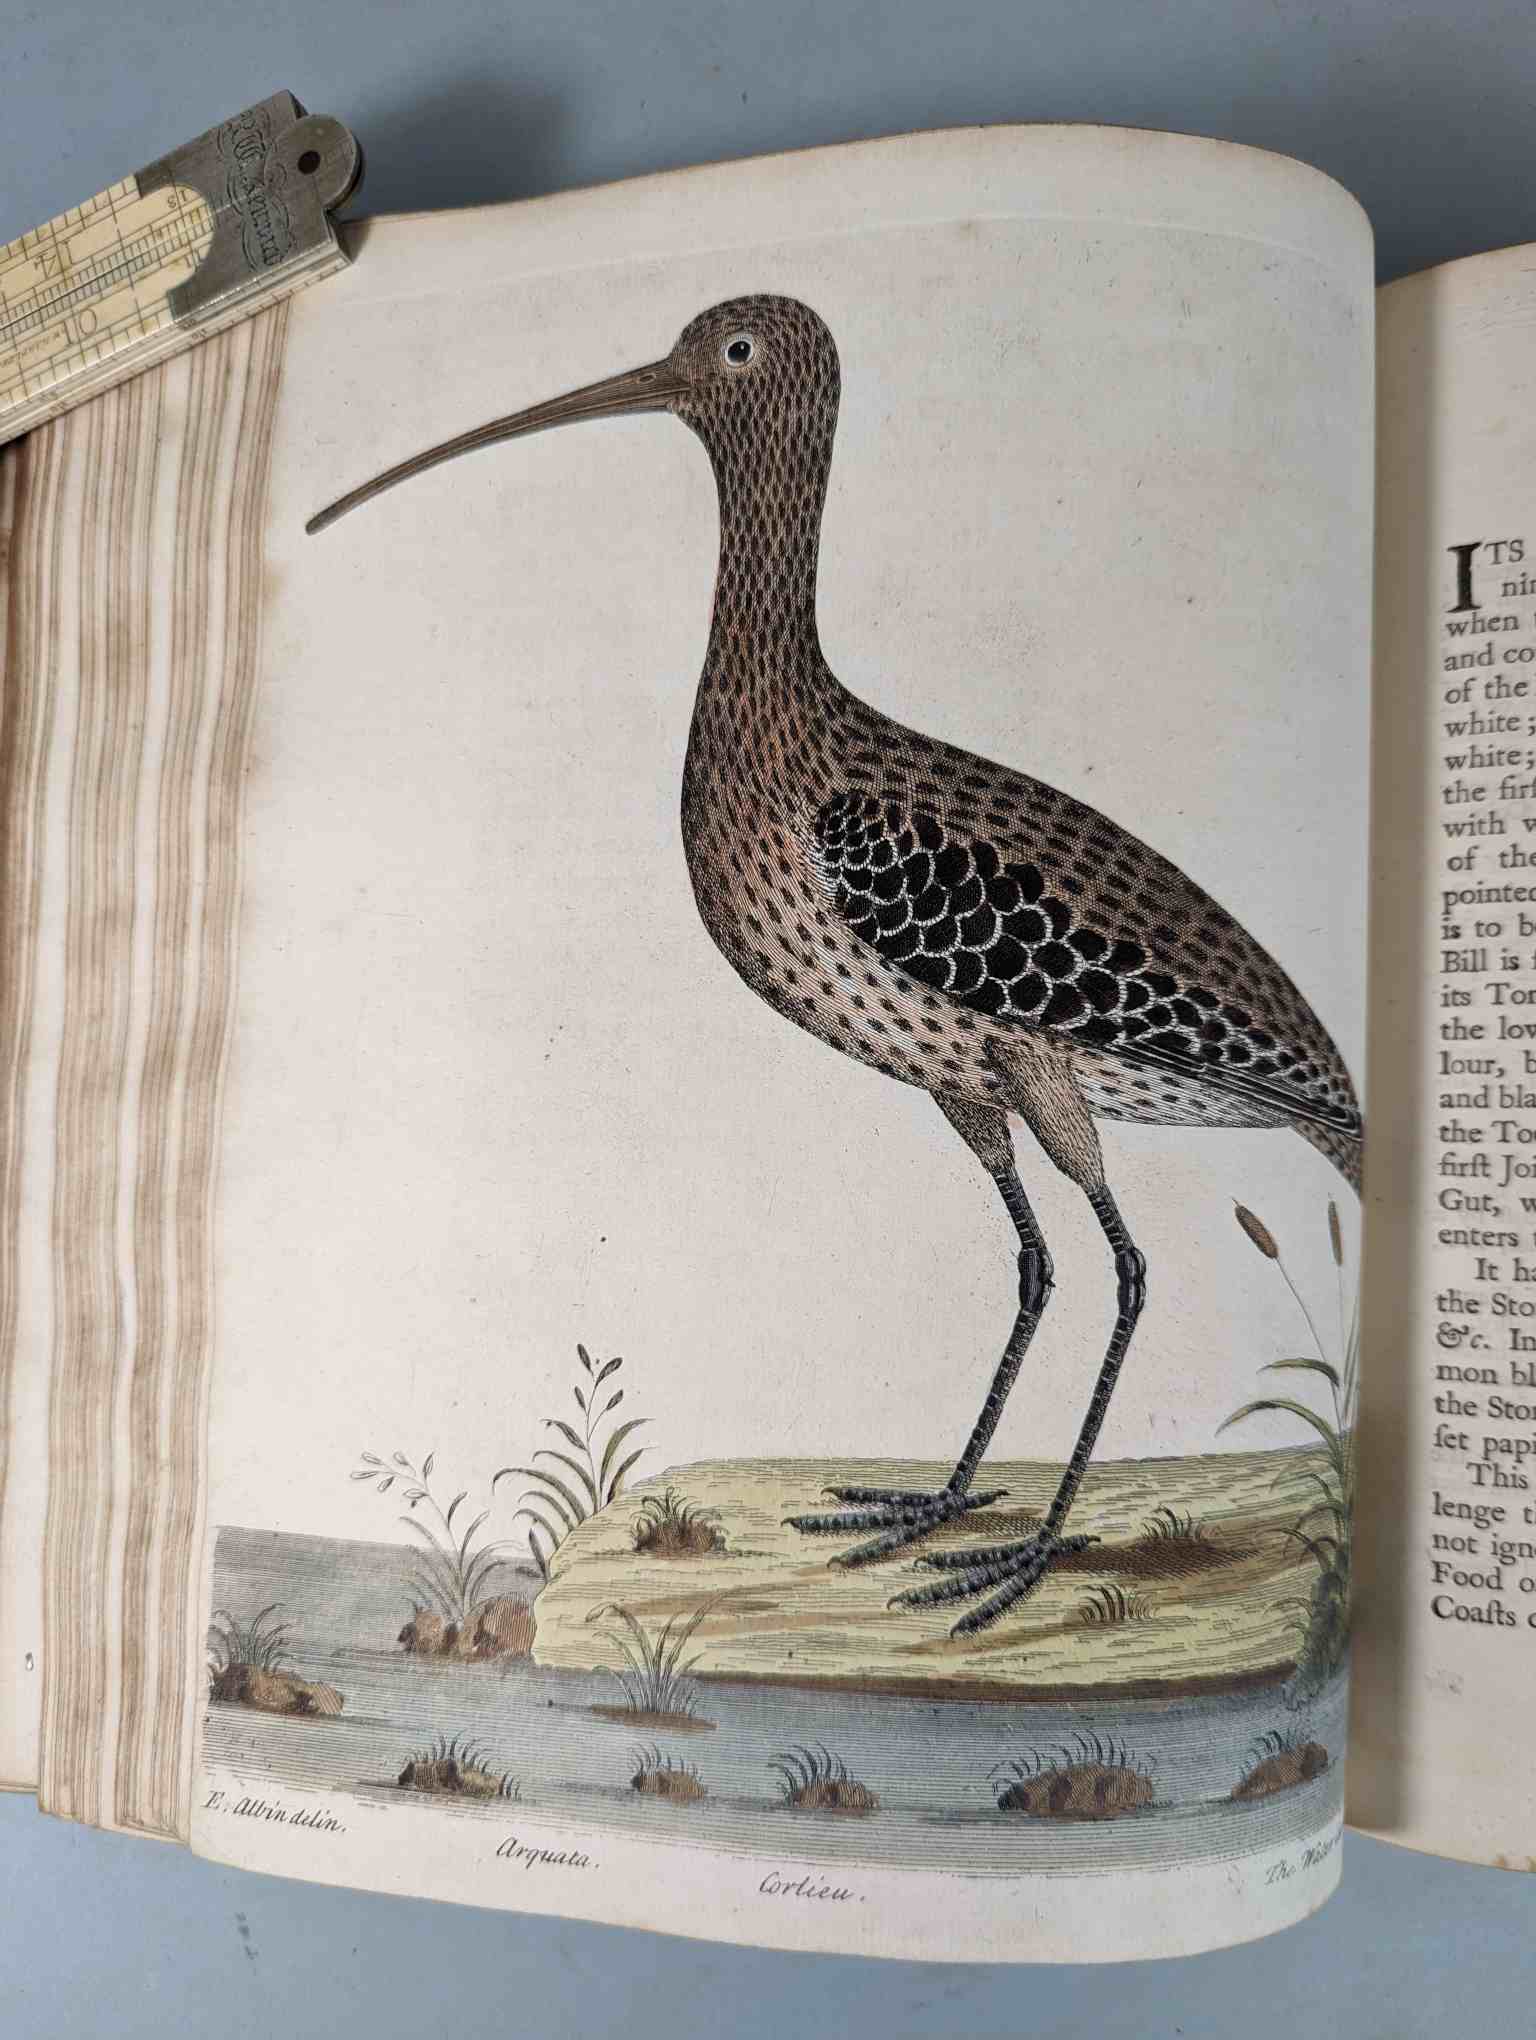 ALBIN, Eleazar. A Natural History of Birds, to which are added, Notes and Observations by W. - Image 82 of 208